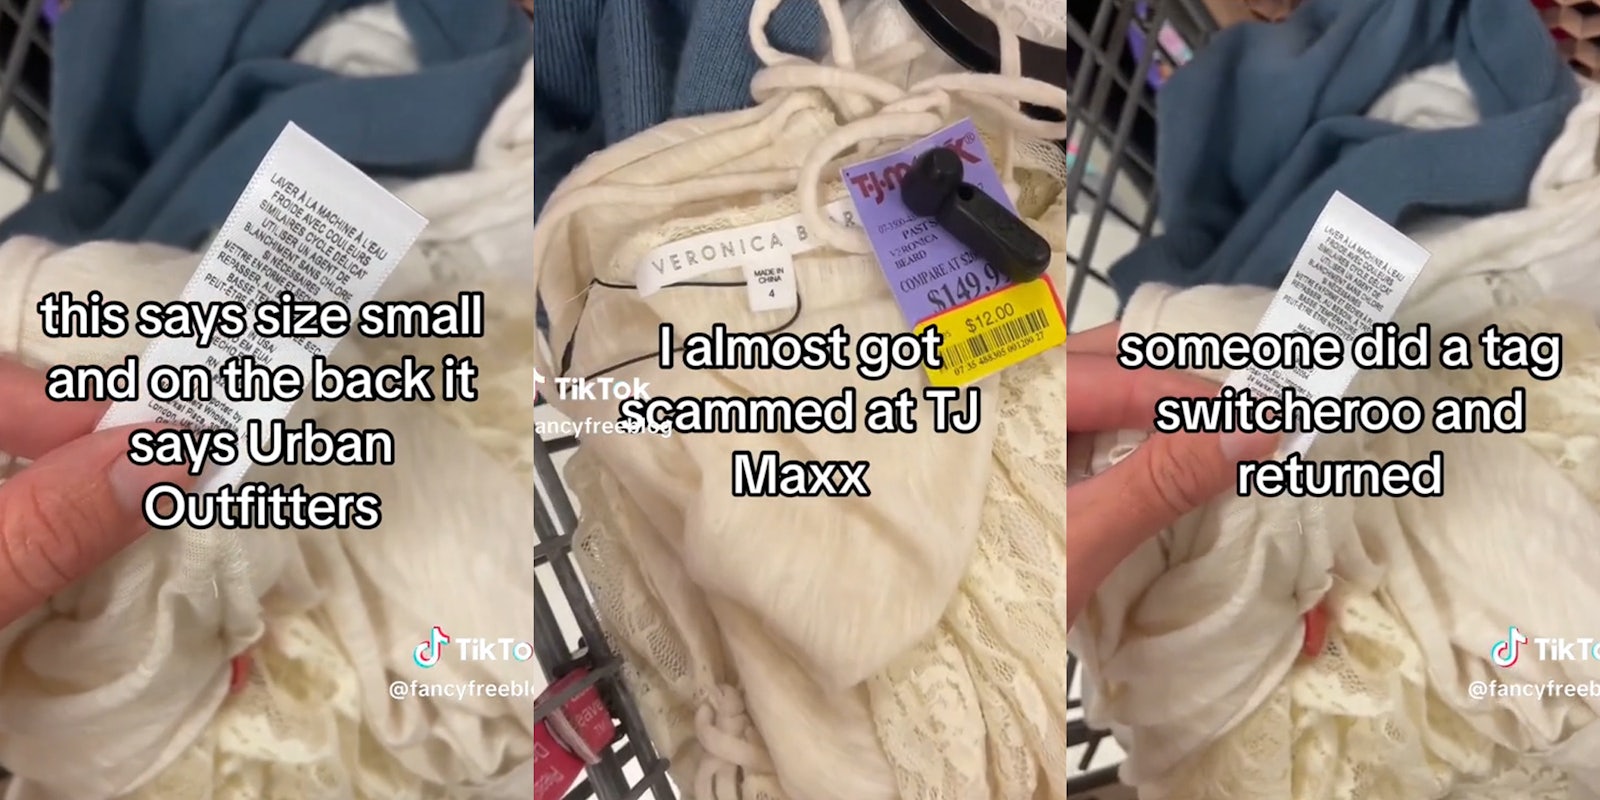 woman with clothing item and captions 'this says size small and on the back it says Urban Outfitters' (l) 'I almost got scammed at TJ Maxx' (c) 'someone did a tag switcheroo and returned' (r)